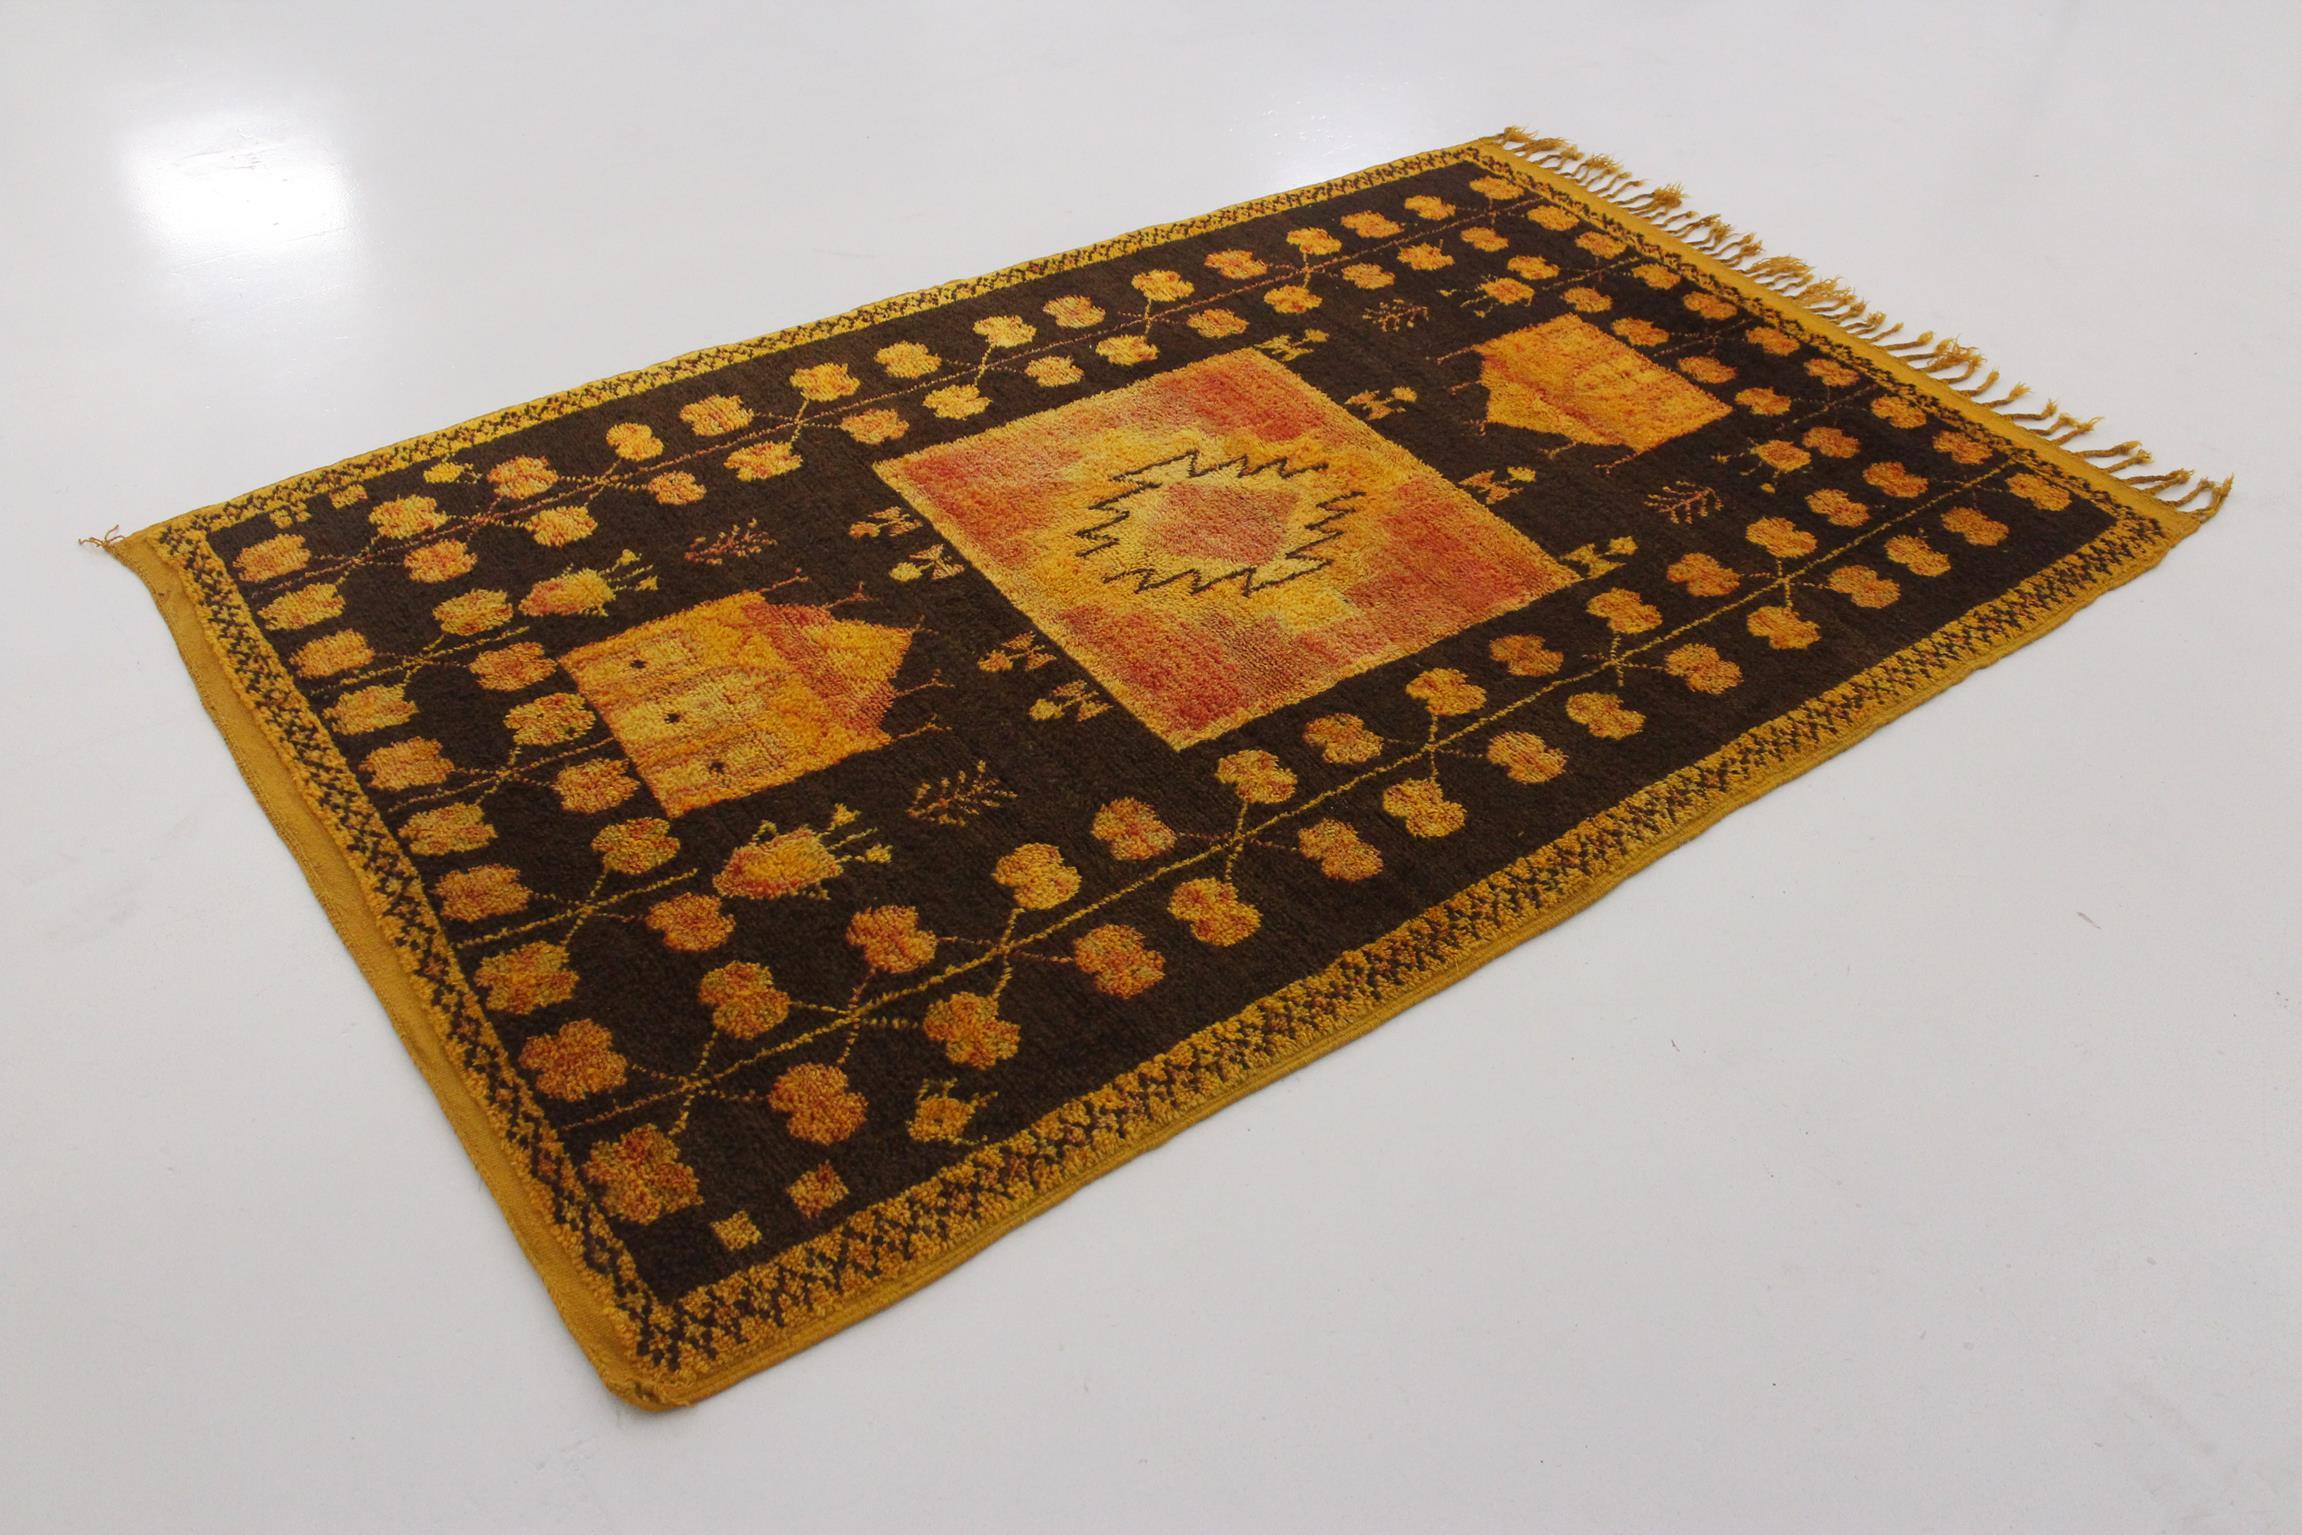 Vintage Moroccan Taznakht rug - Black/orange/yellow - 4.5x7.2feet / 137x220cm In Good Condition For Sale In Marrakech, MA